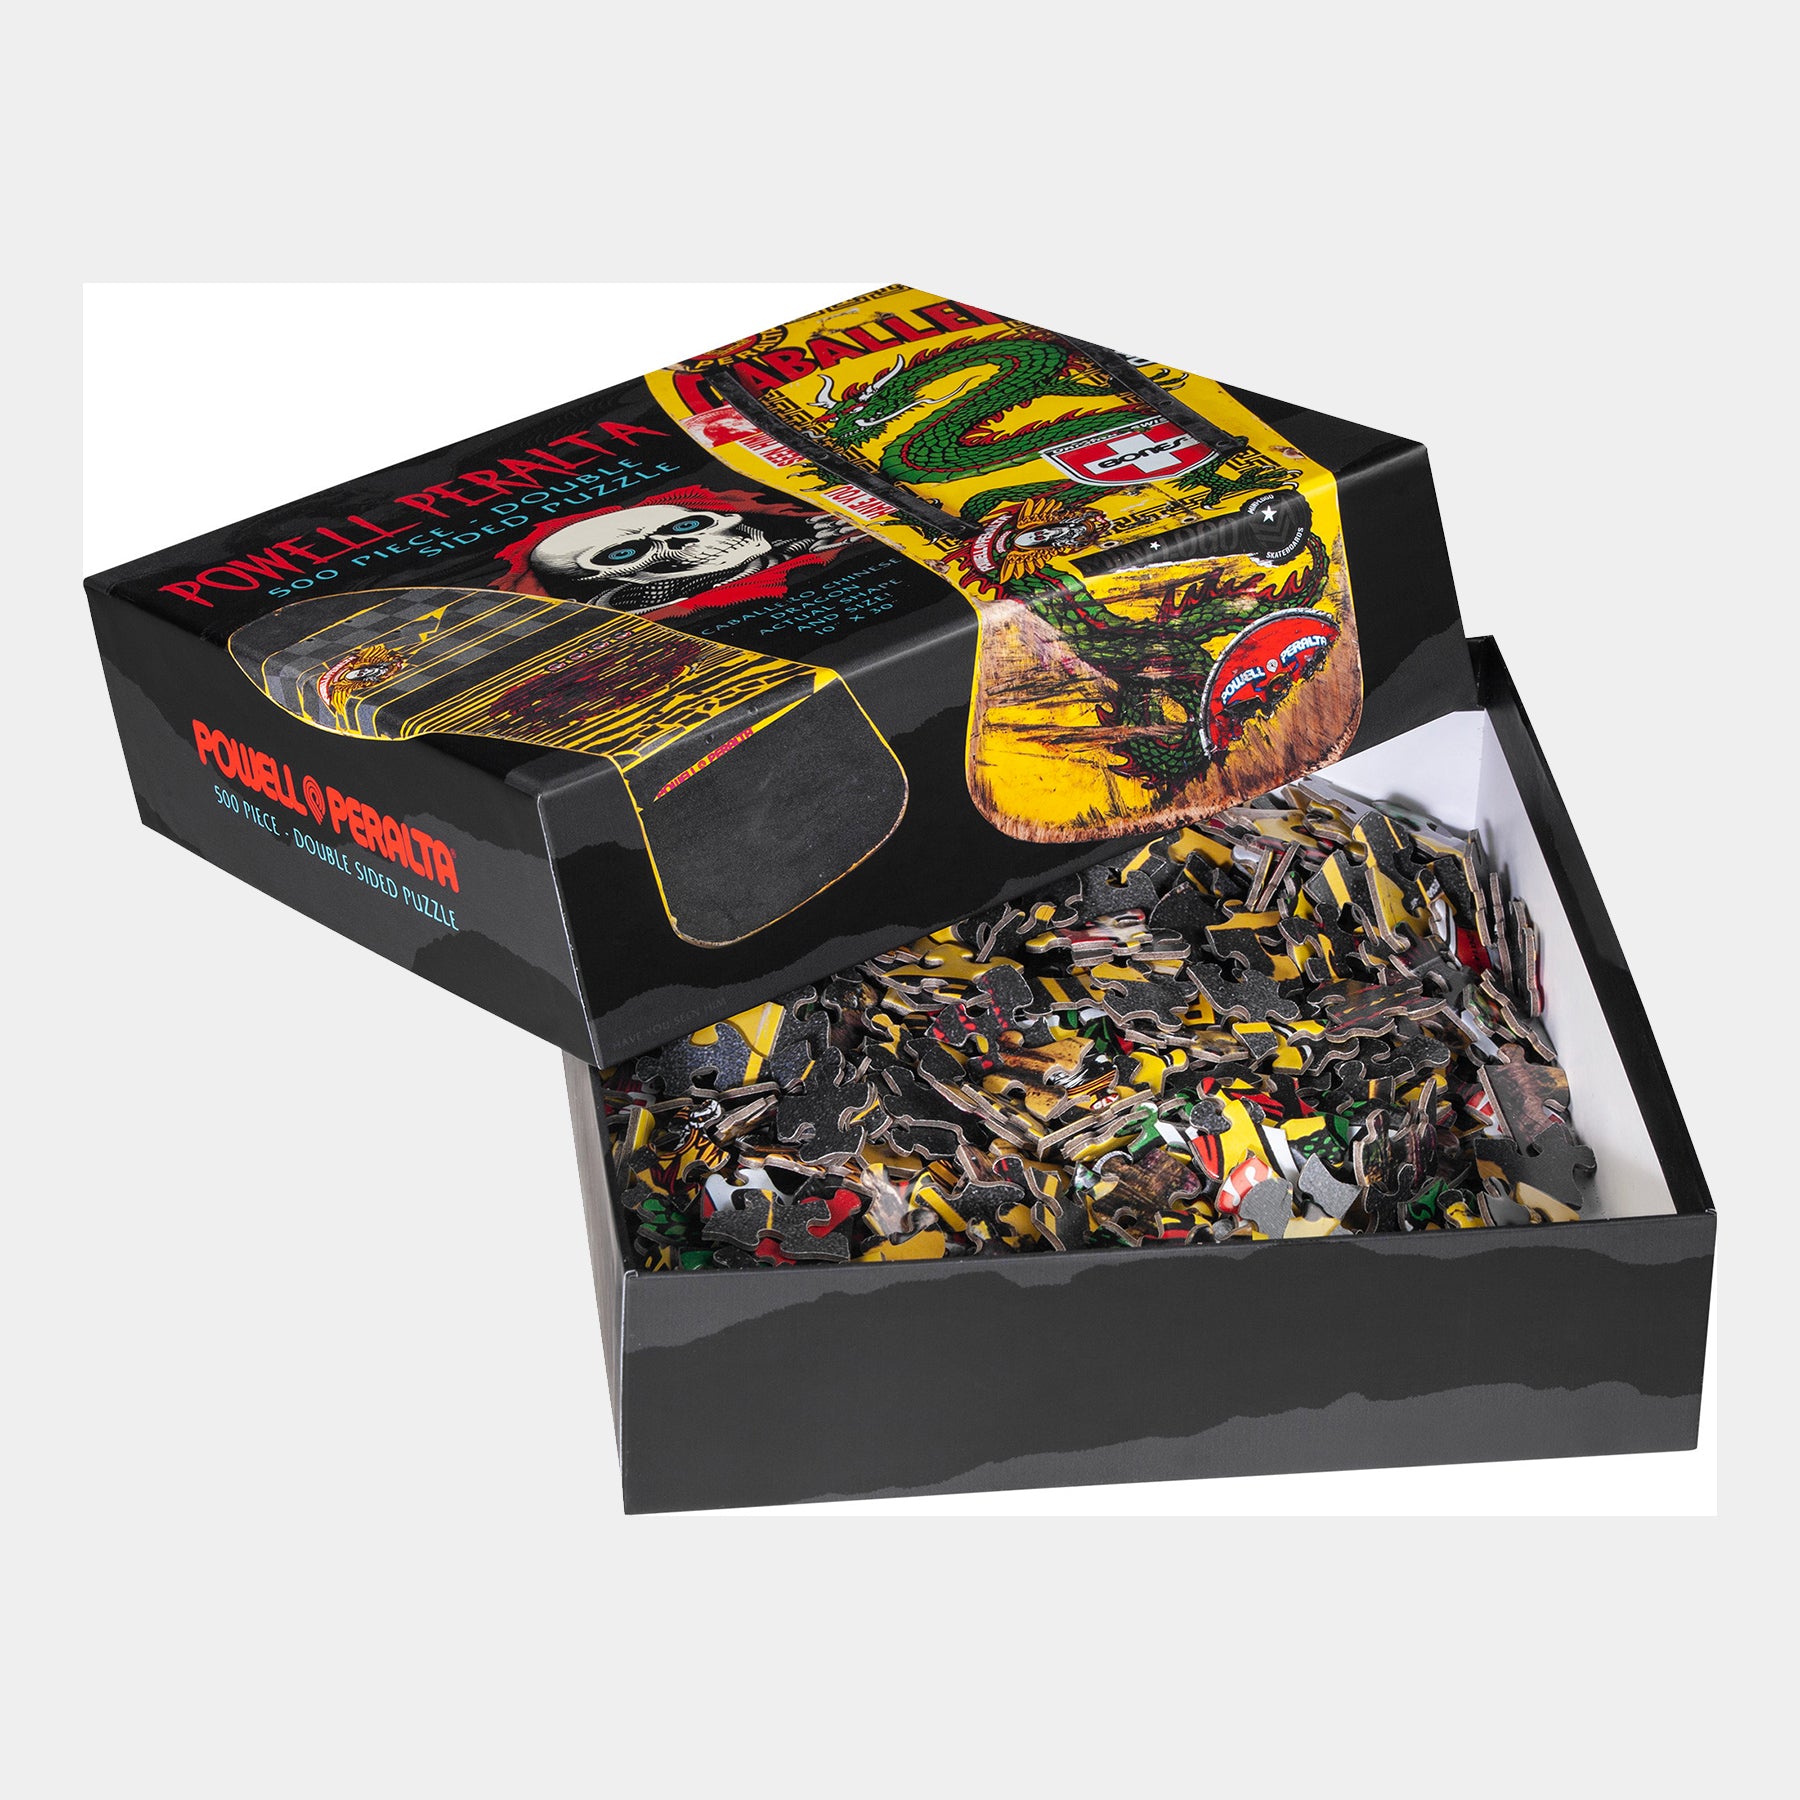 powell peralta puzzle caballero Chinese dragon yellow